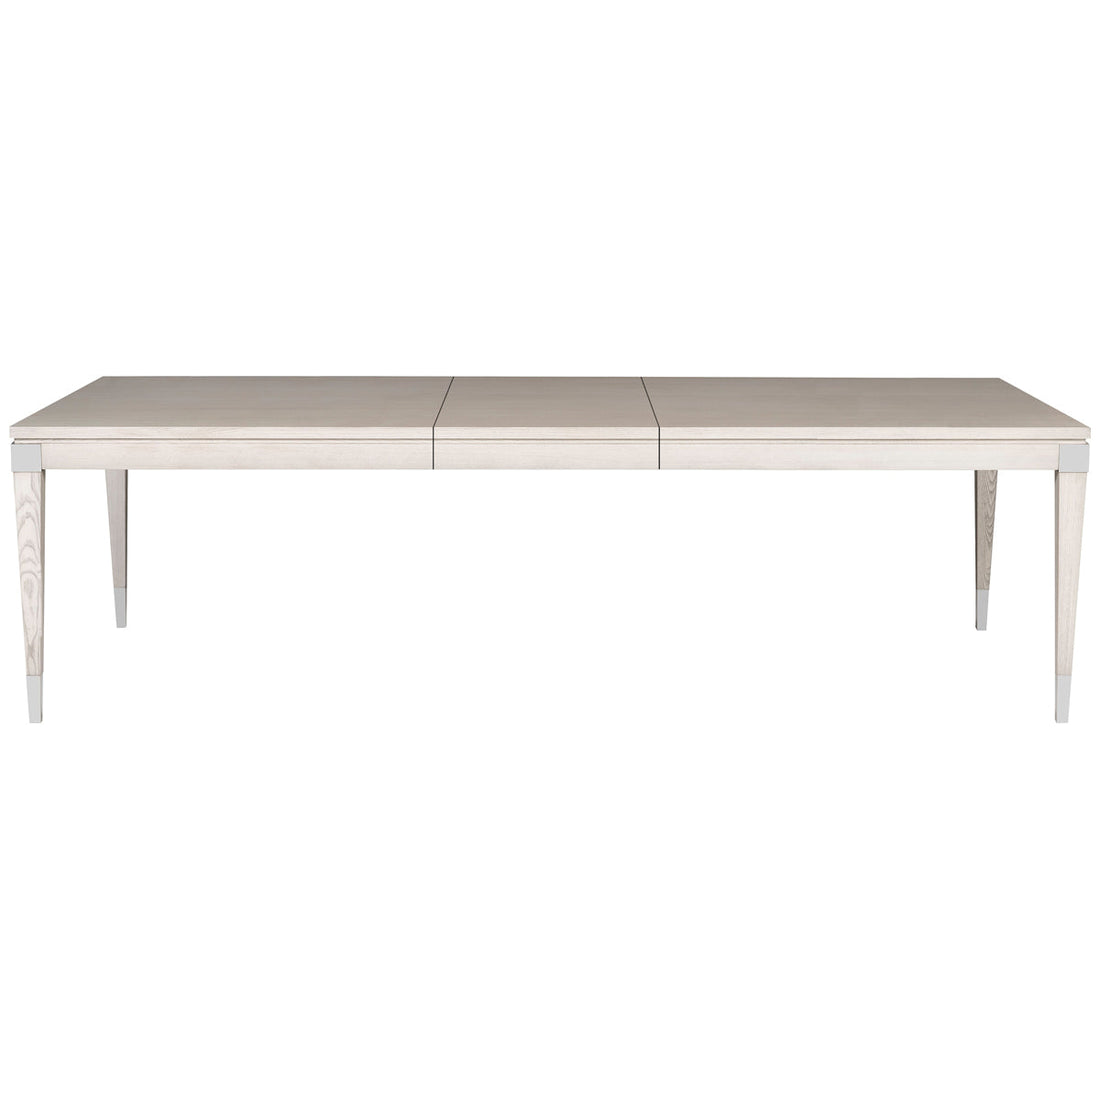 Vanguard Furniture Wood Tapered Dining Table with Wood Tapered Leg